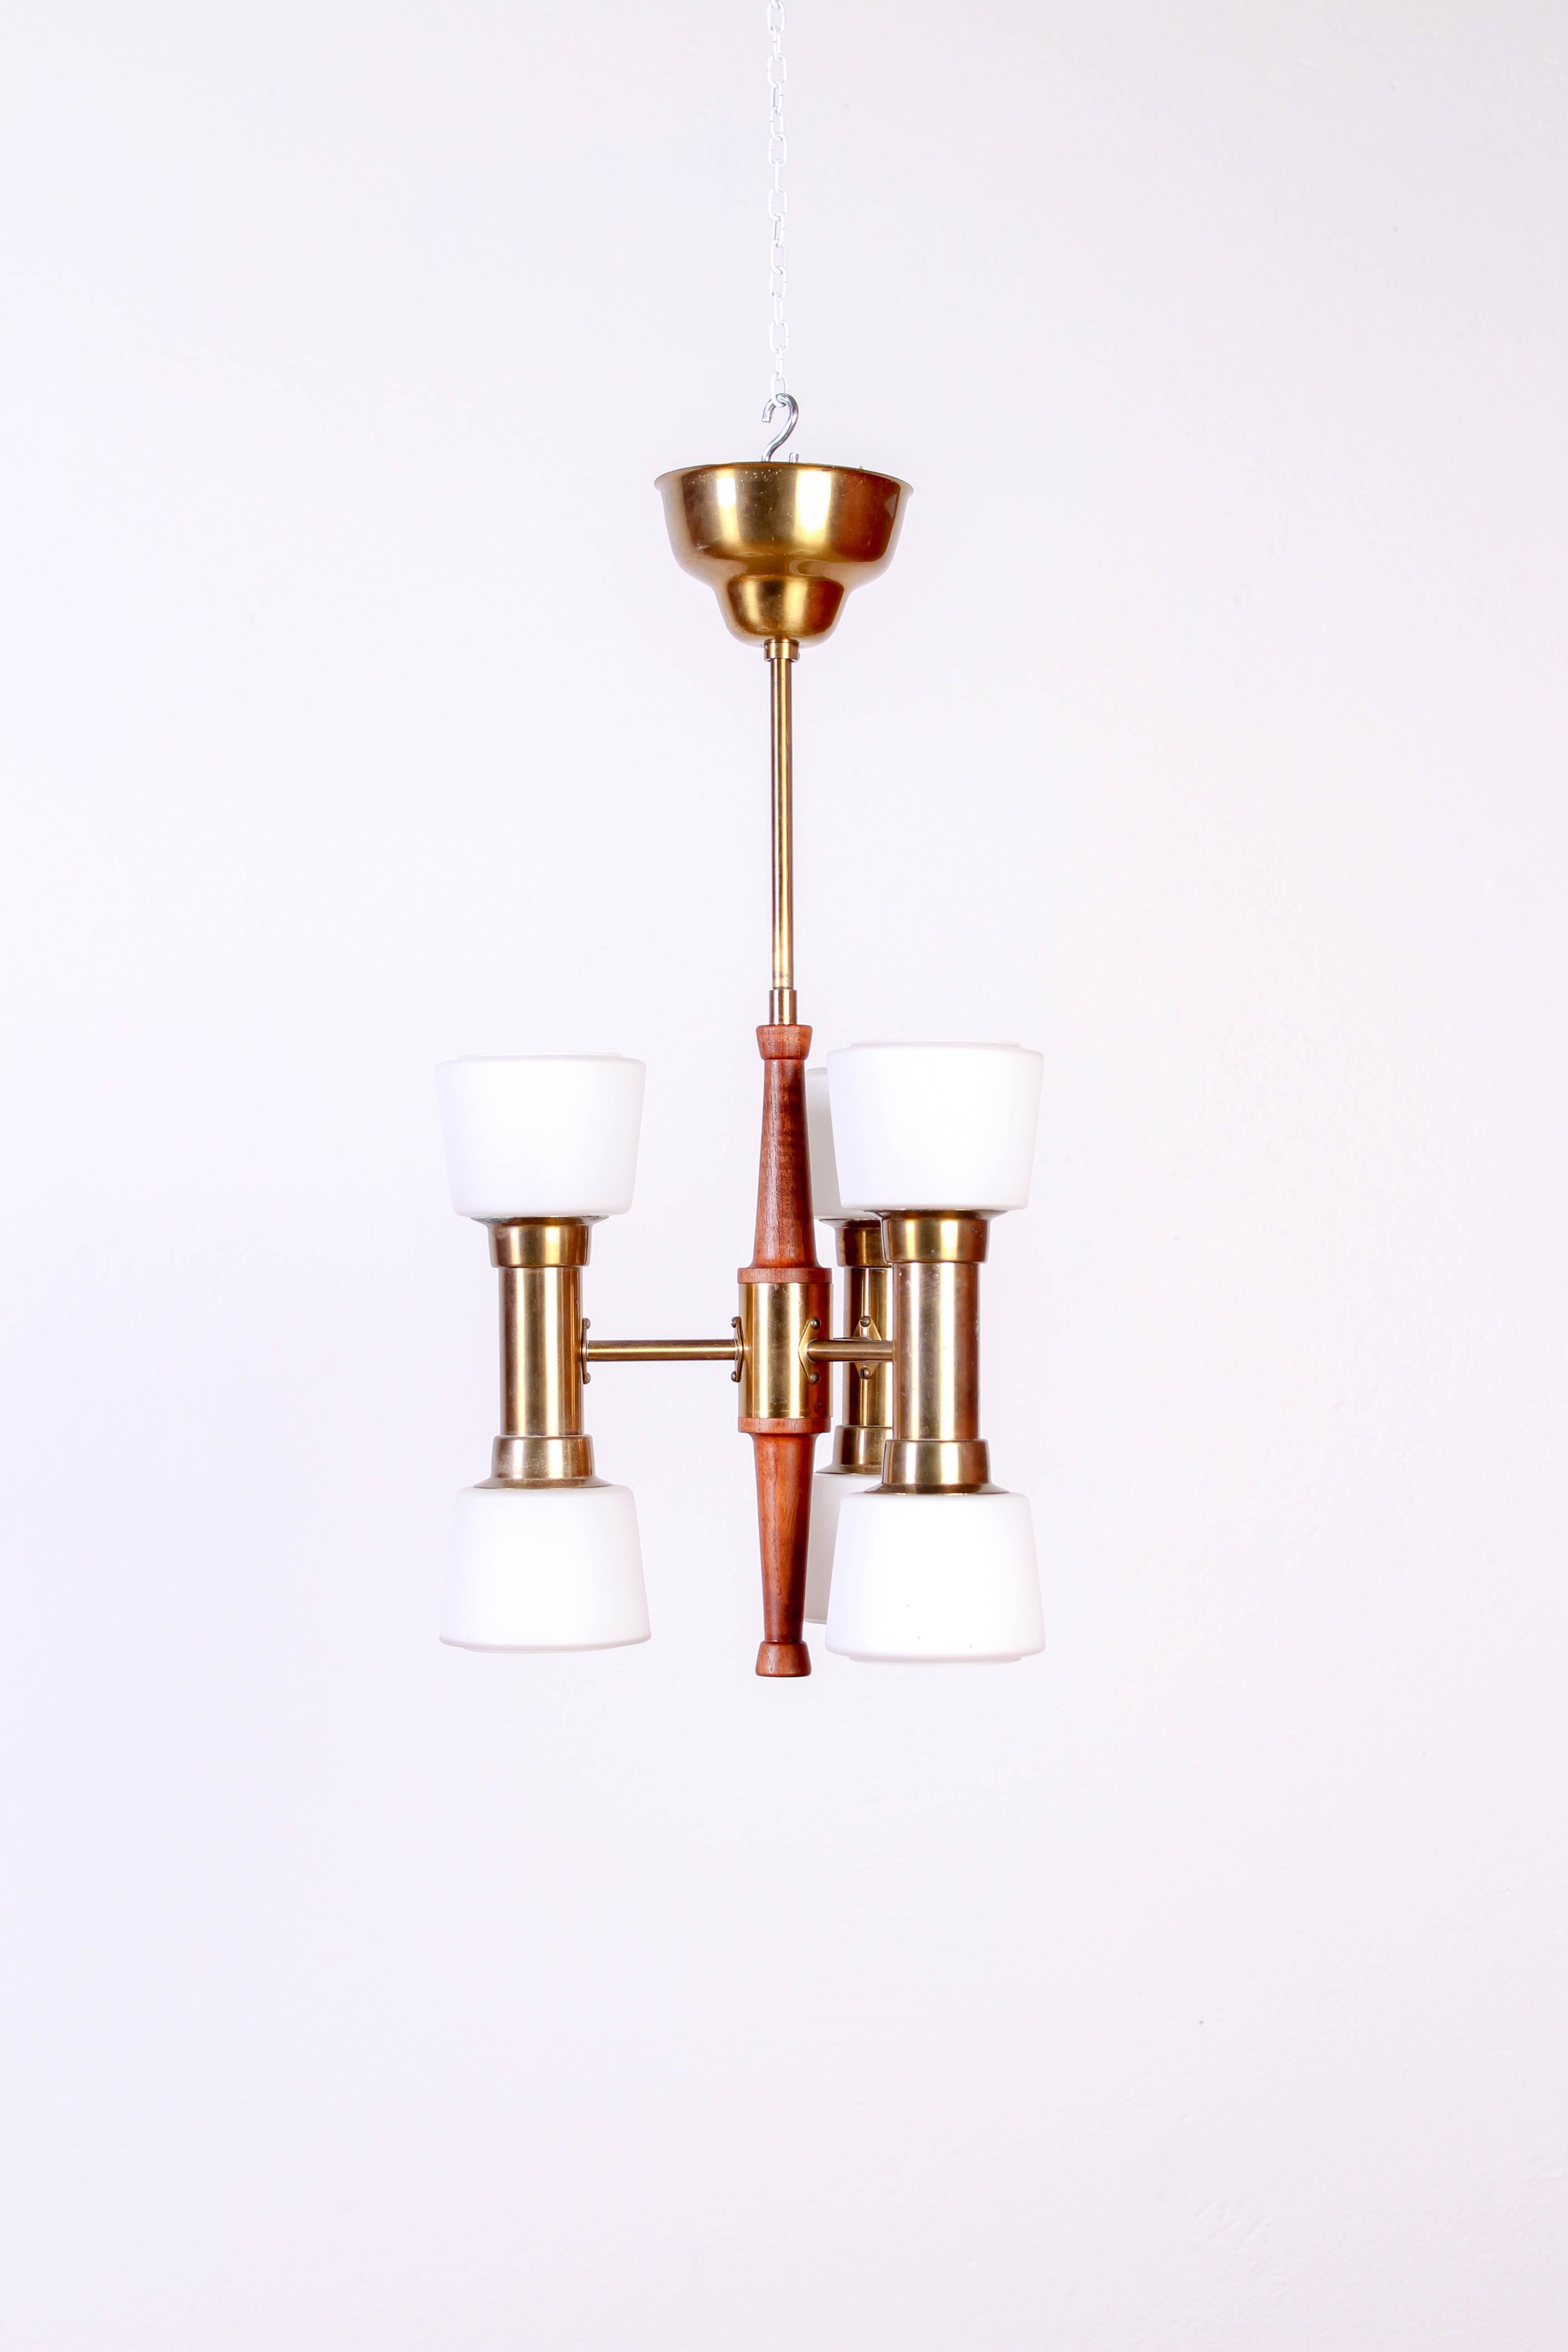 Midcentury ceiling lamp designed by Hans Bergström and produced by Swedish company ASEA. The lamp is made out of brass and teak with opaline glass shades. The lamp is in very good vintage condition with minor signs of usage.